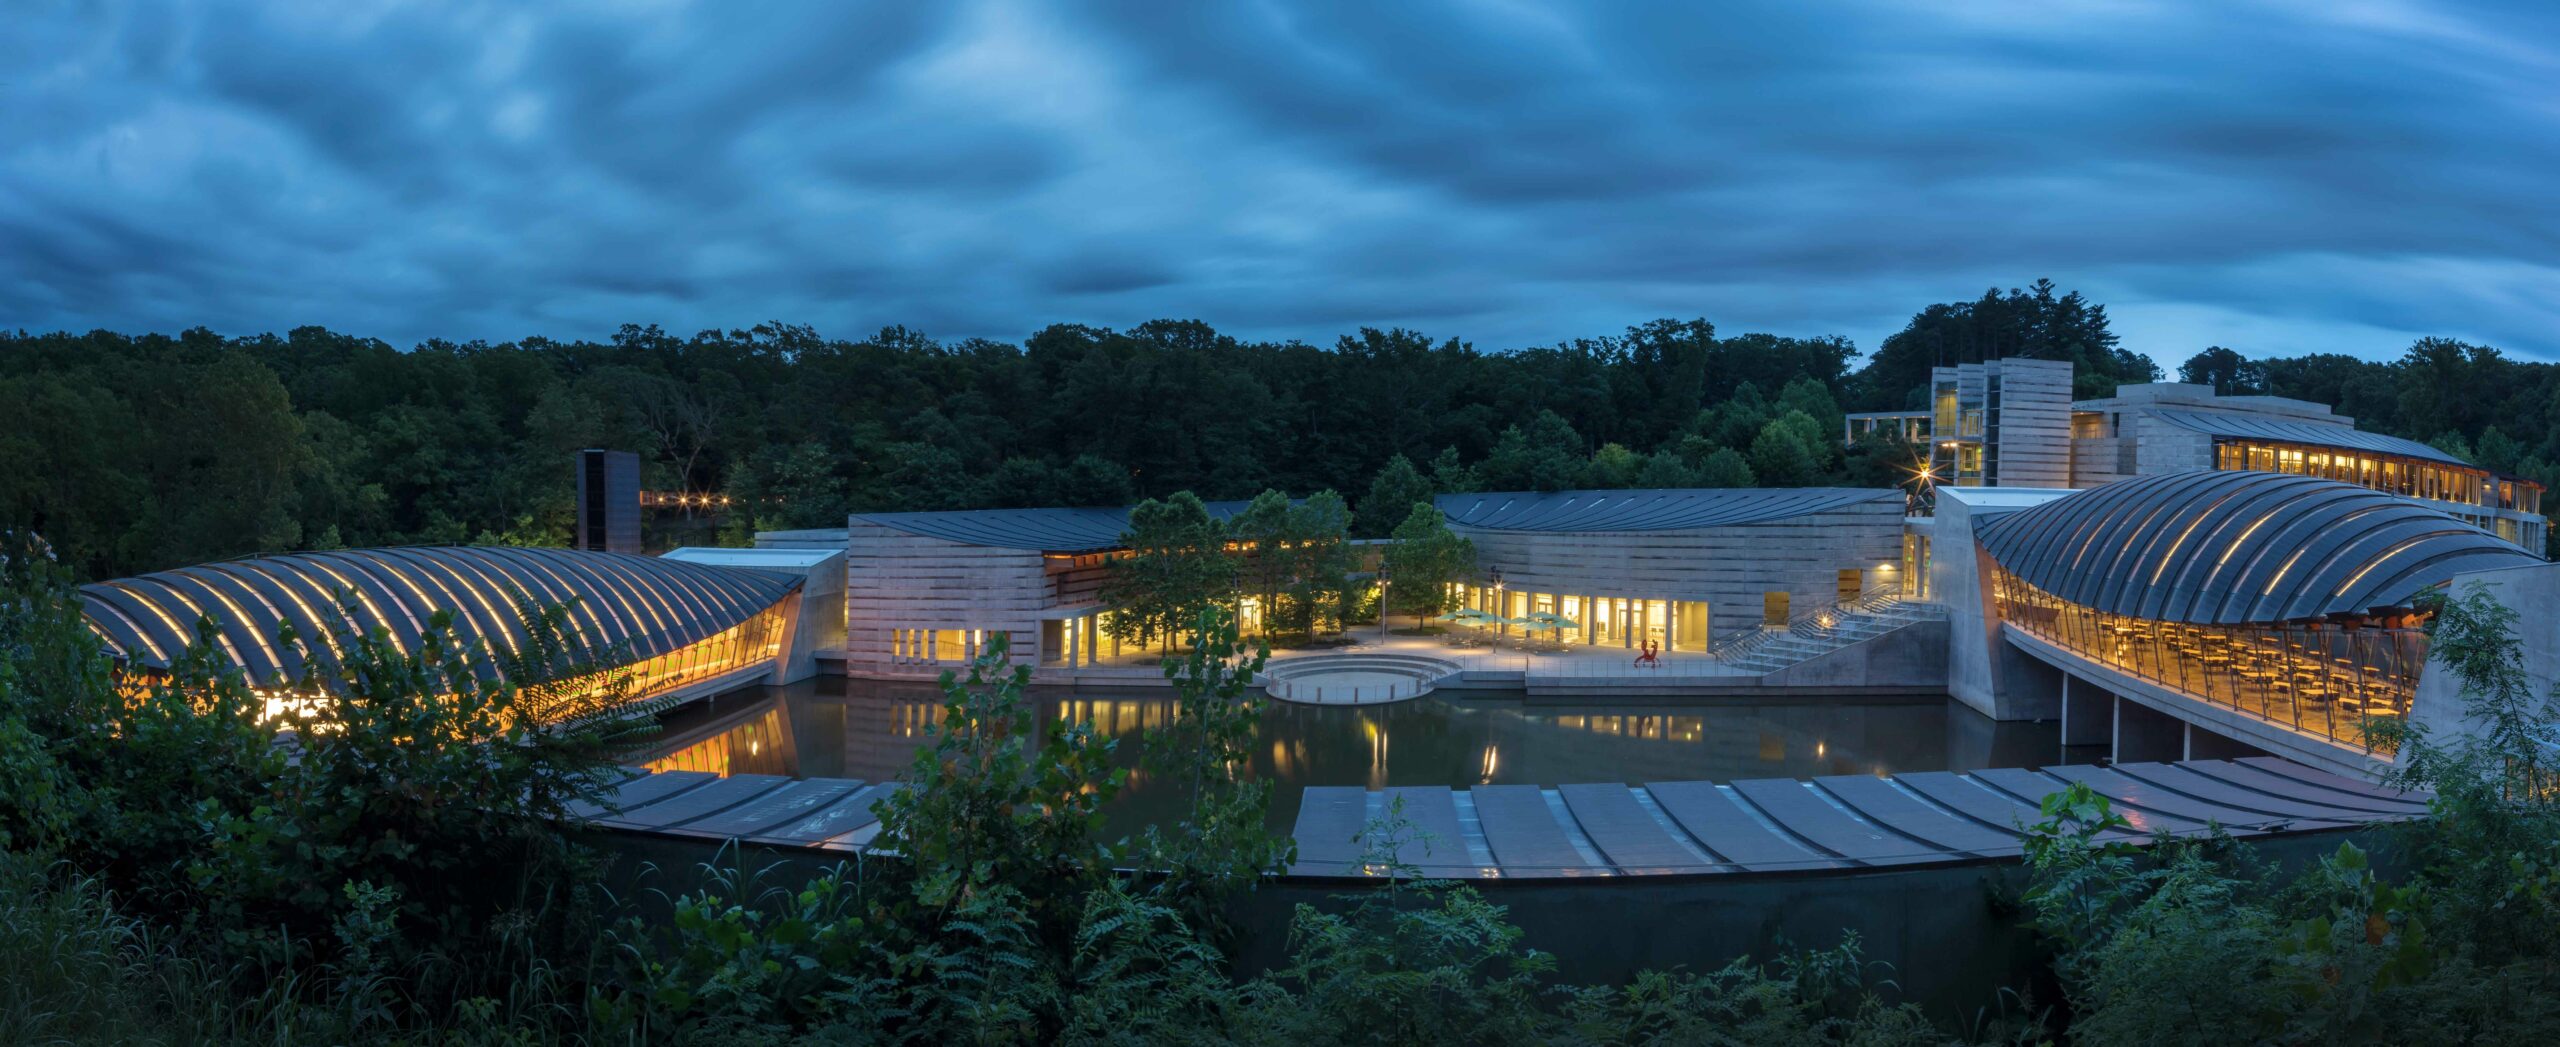 Crystal Bridges seeks nominations for Don Tyson Prize. Nominations due by April 29, 2022.